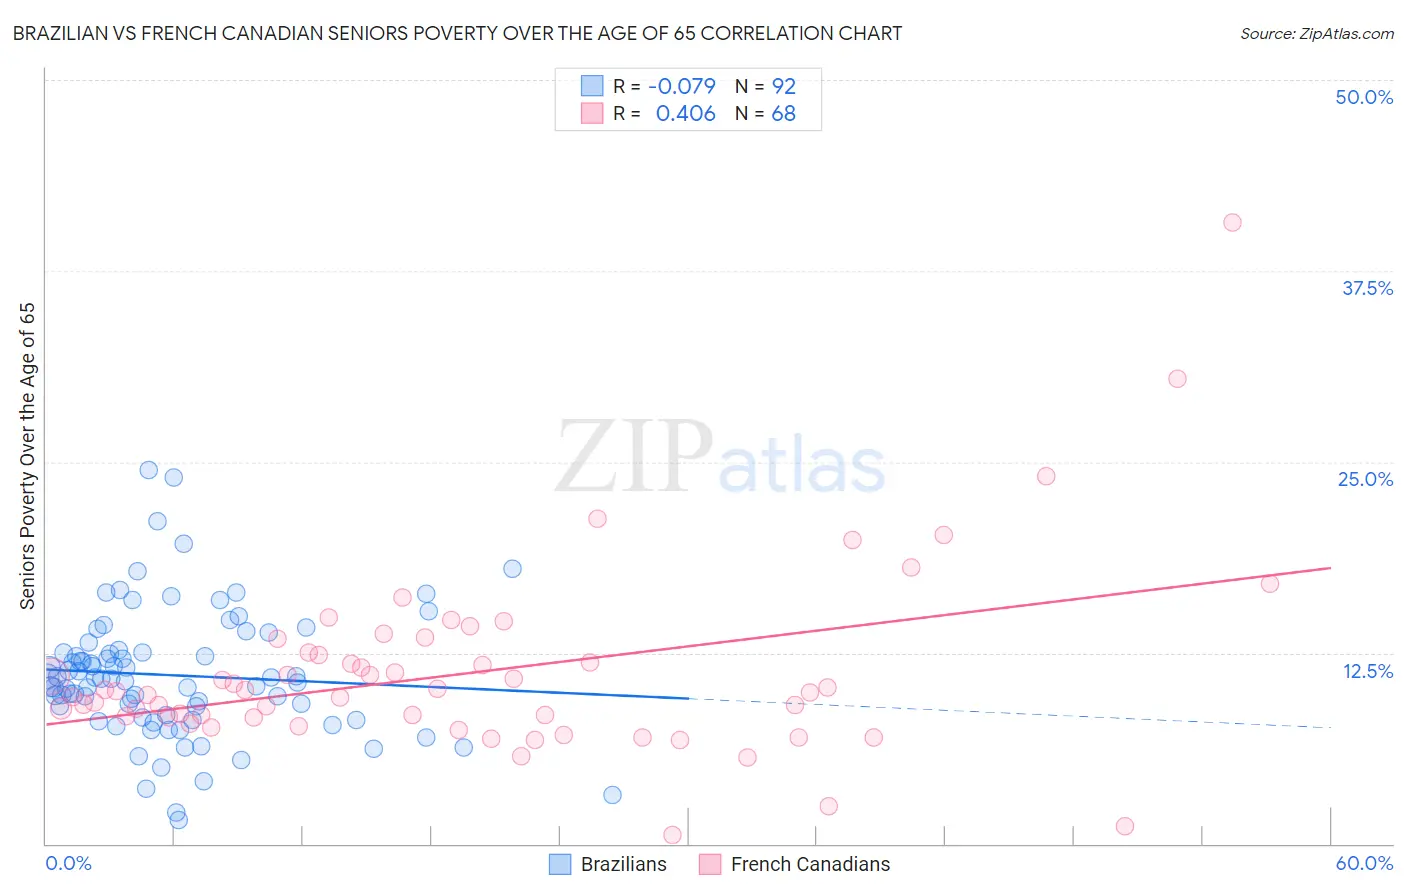 Brazilian vs French Canadian Seniors Poverty Over the Age of 65